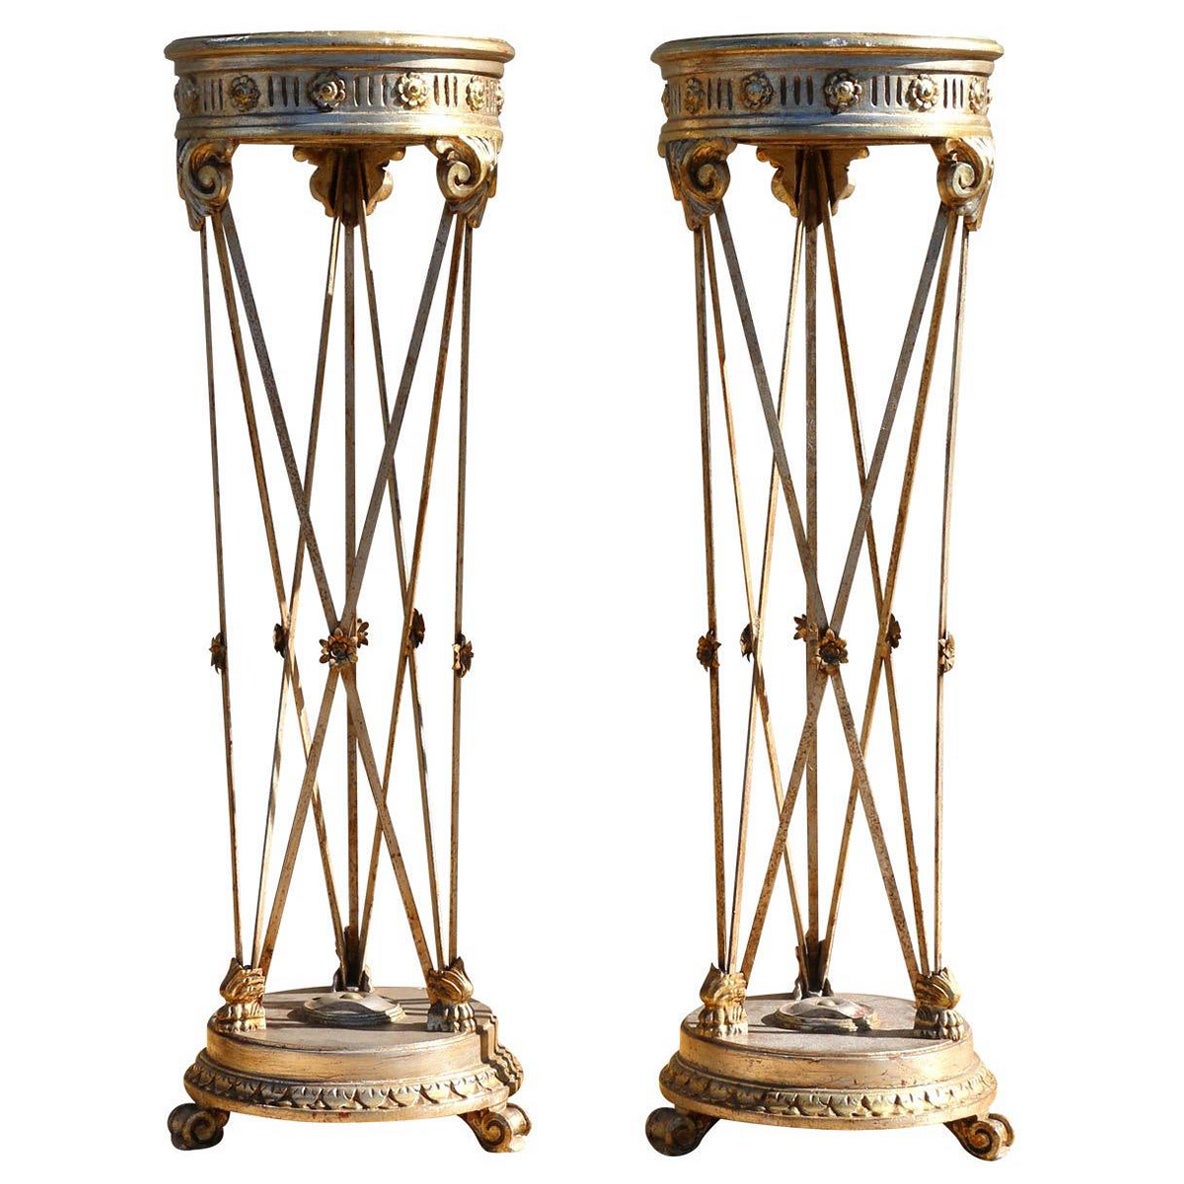 Pair of Antique Italian Wrought Iron and Silver Leaf Wood Plant Stands/Pedestal